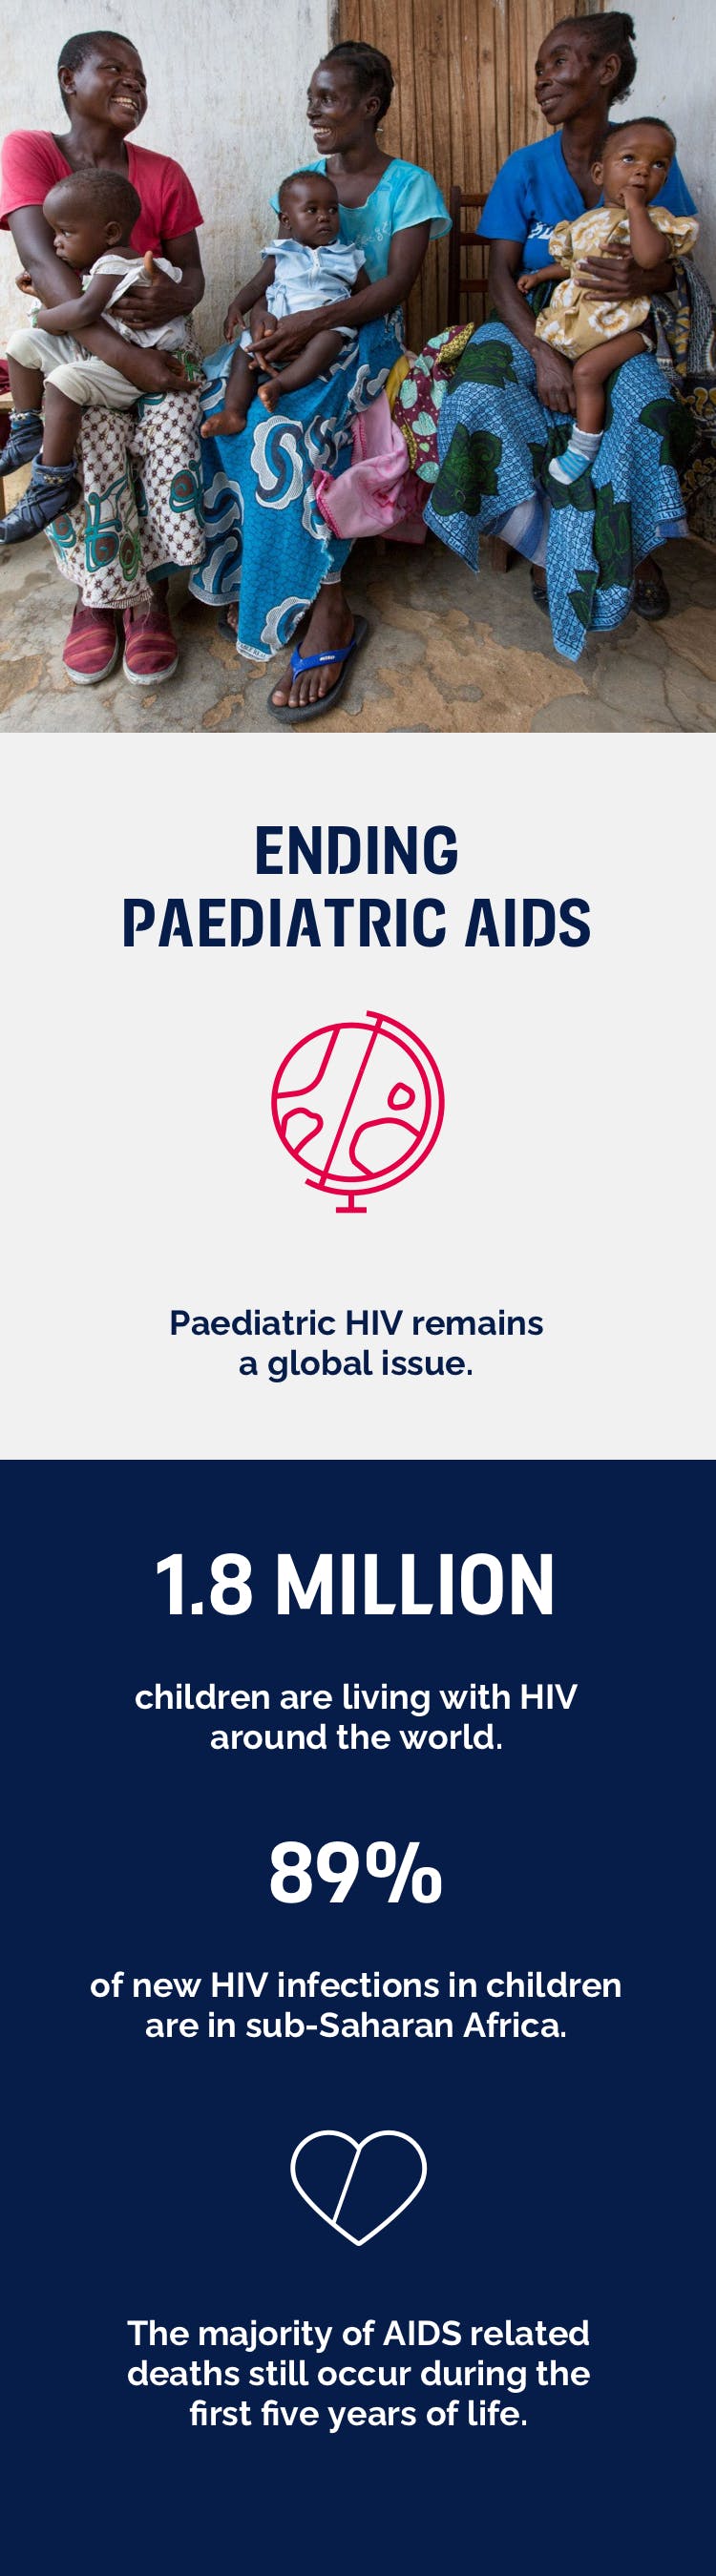 Infographic about paediatric AIDS